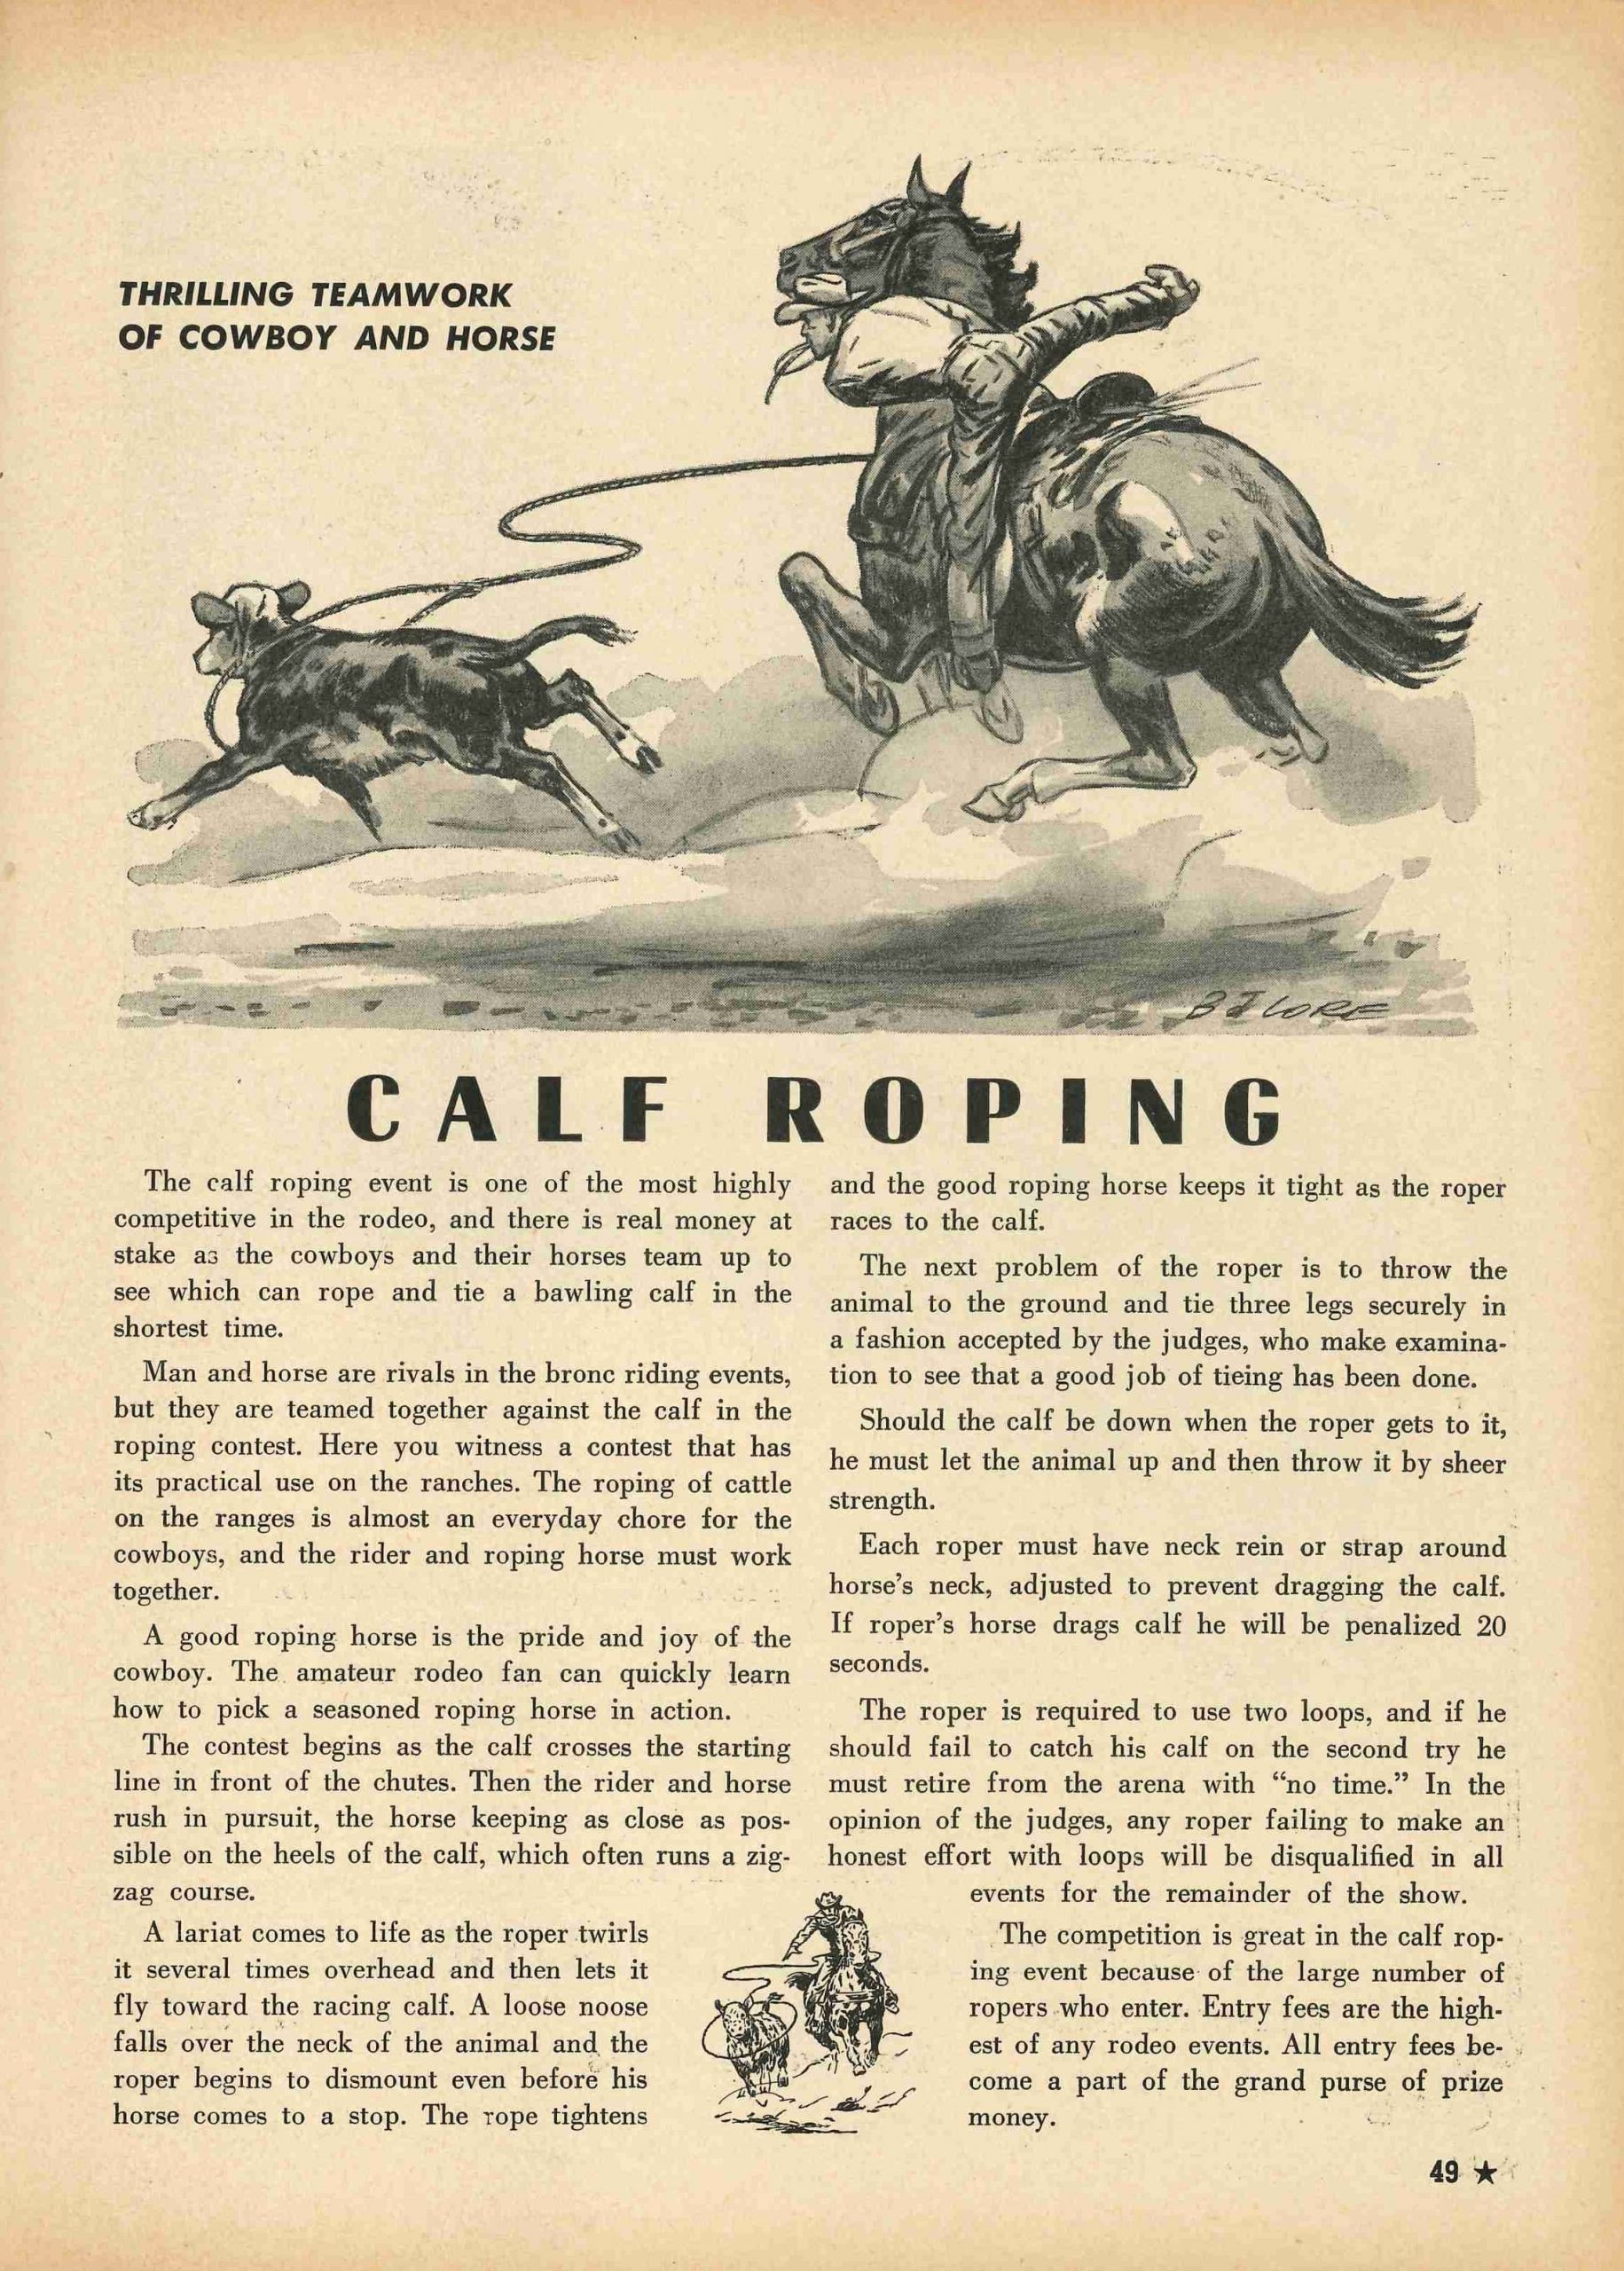 Page from stock show annual describing calf roping event